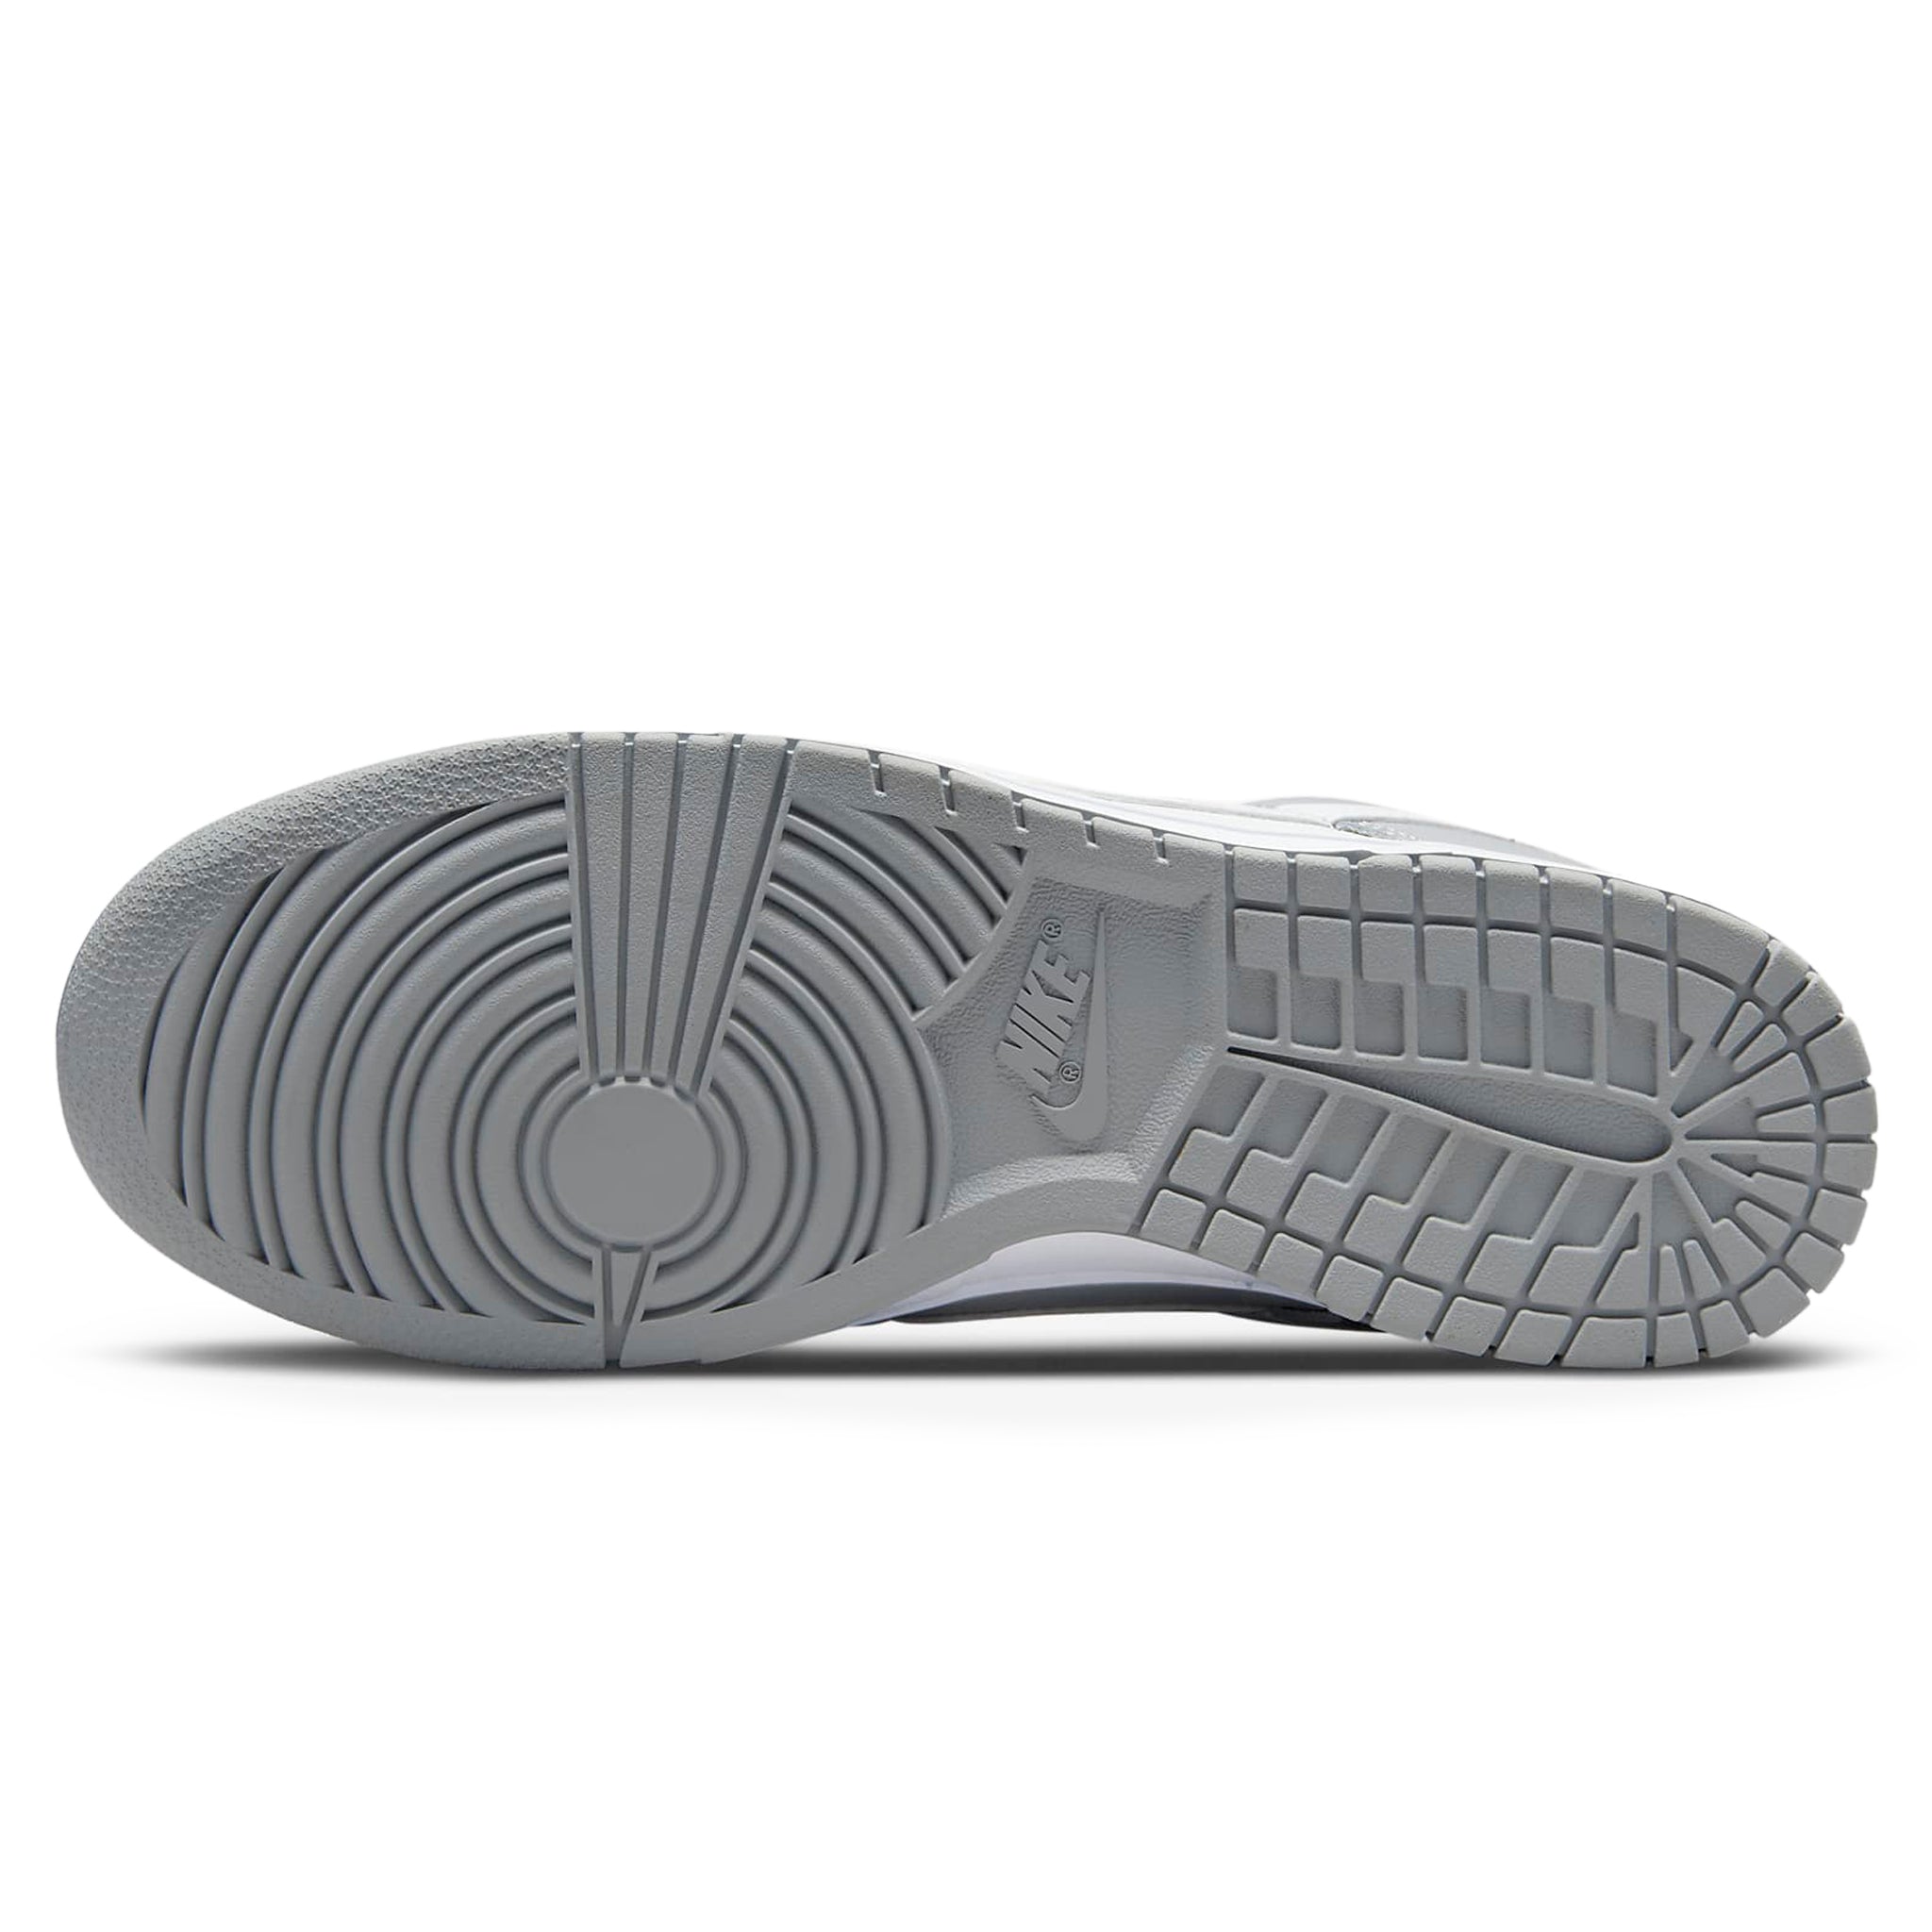 Sole view of Nike Dunk Low Two Tone Grey DJ6188-001